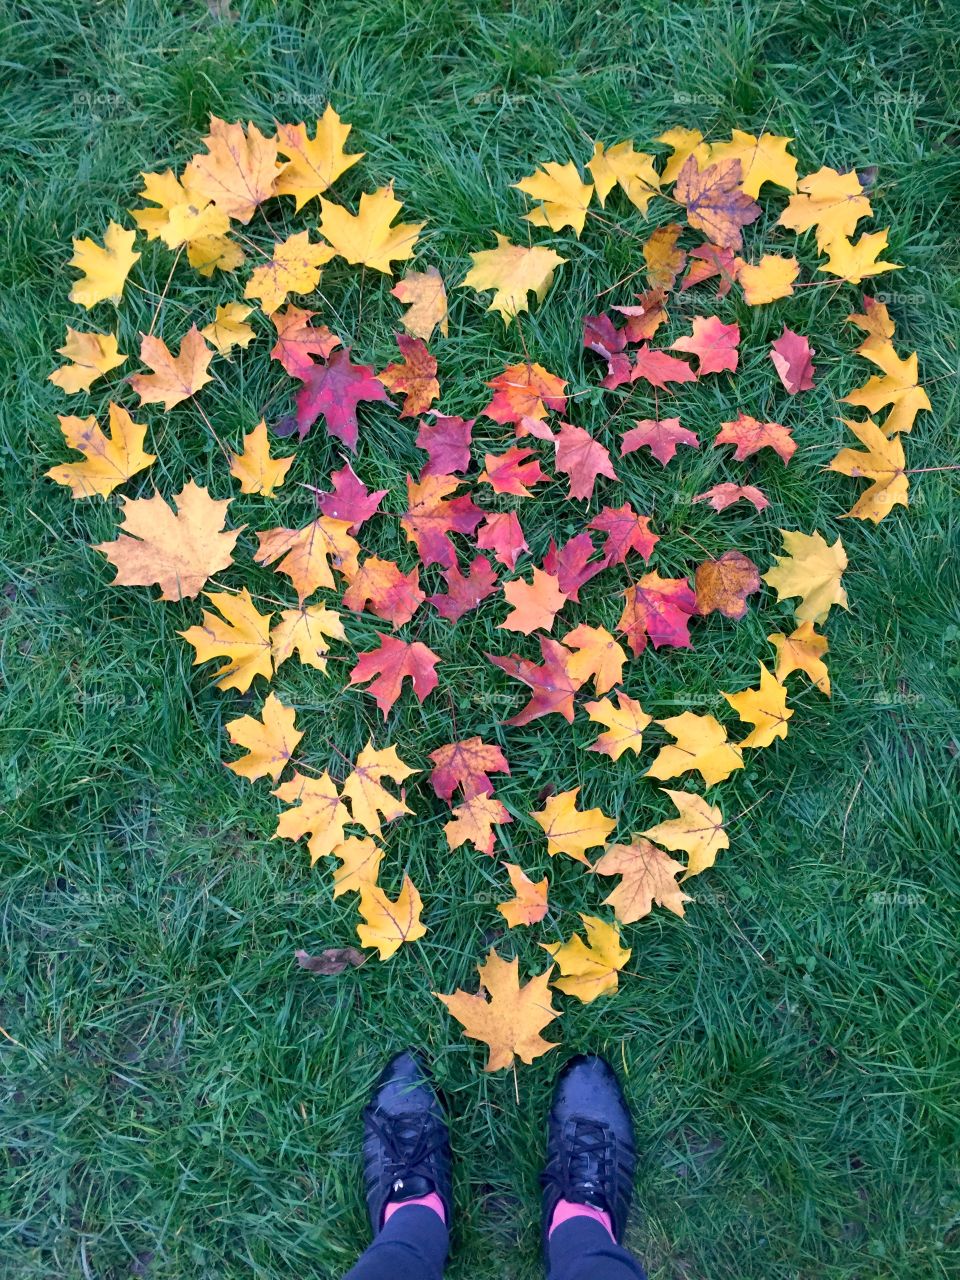 Heart made of Autumn leaves